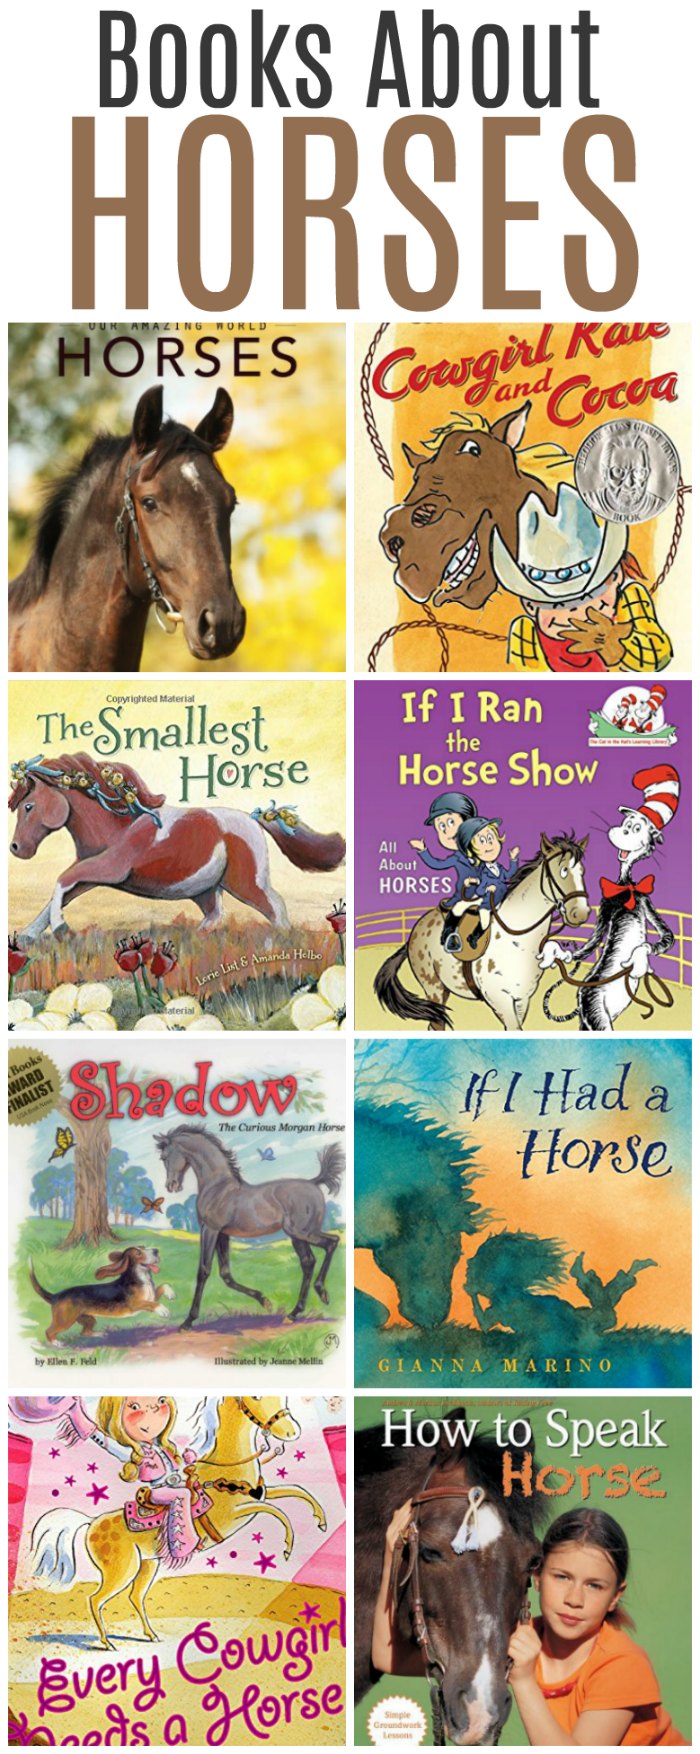 Delightful Horse Books for Kids - Great books about horses that children will love! | Mommy Evolution